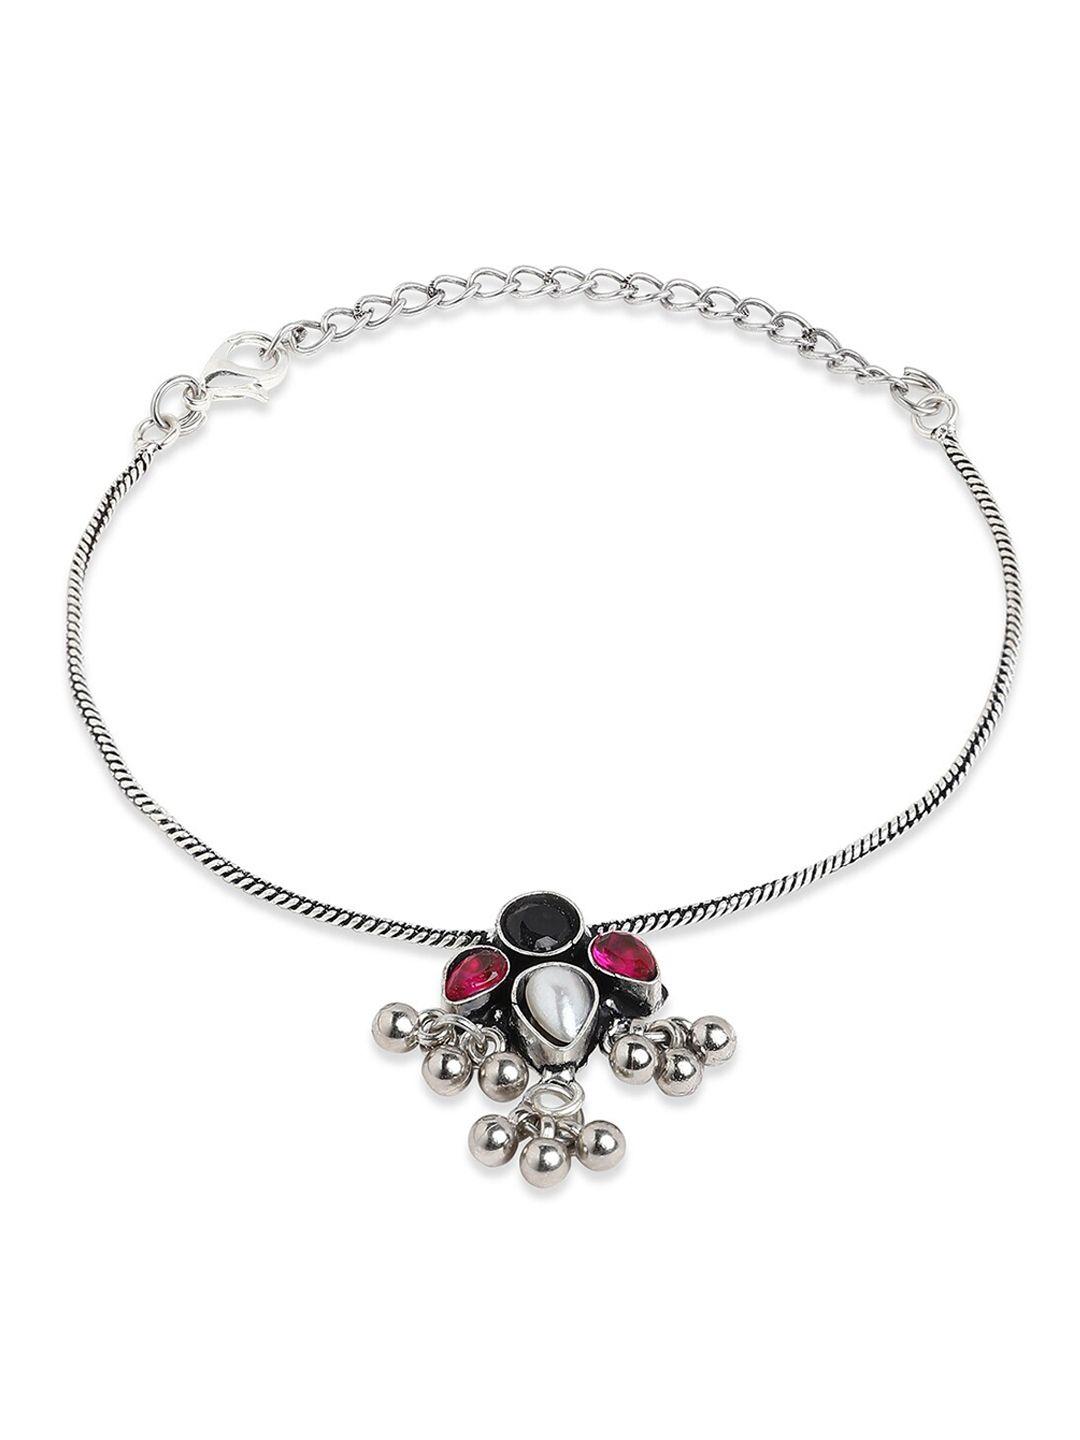 binnis wardrobe silver-plated stone studded anklets